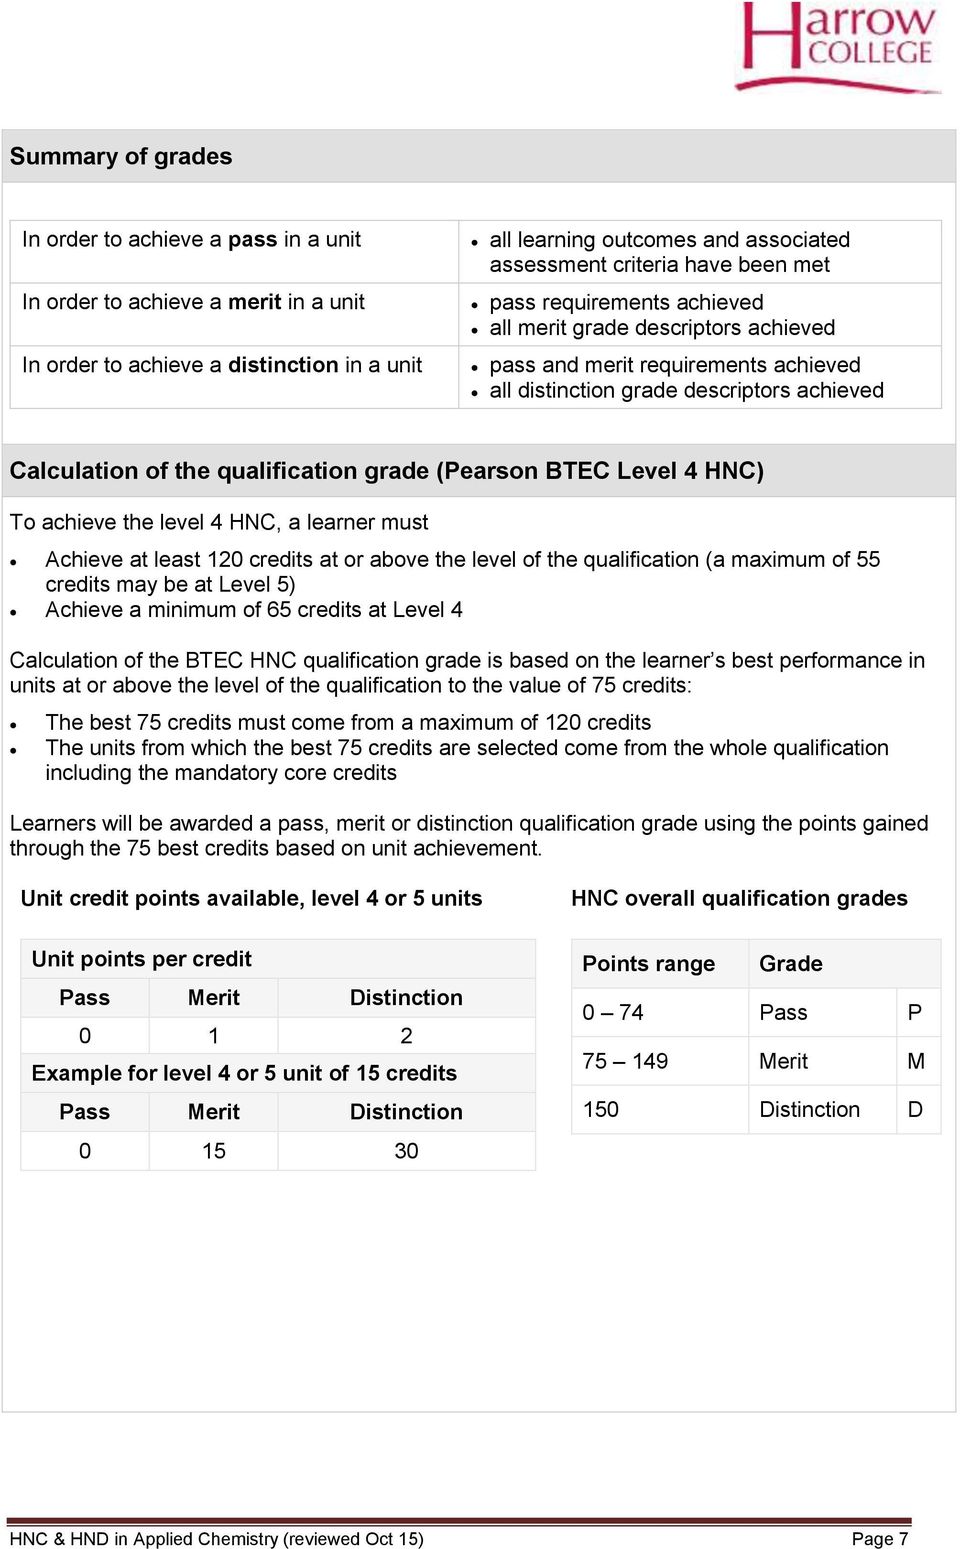 (Pearson BTEC Level 4 HNC) To achieve the level 4 HNC, a learner must Achieve at least 120 credits at or above the level of the qualification (a maximum of 55 credits may be at Level 5) Achieve a